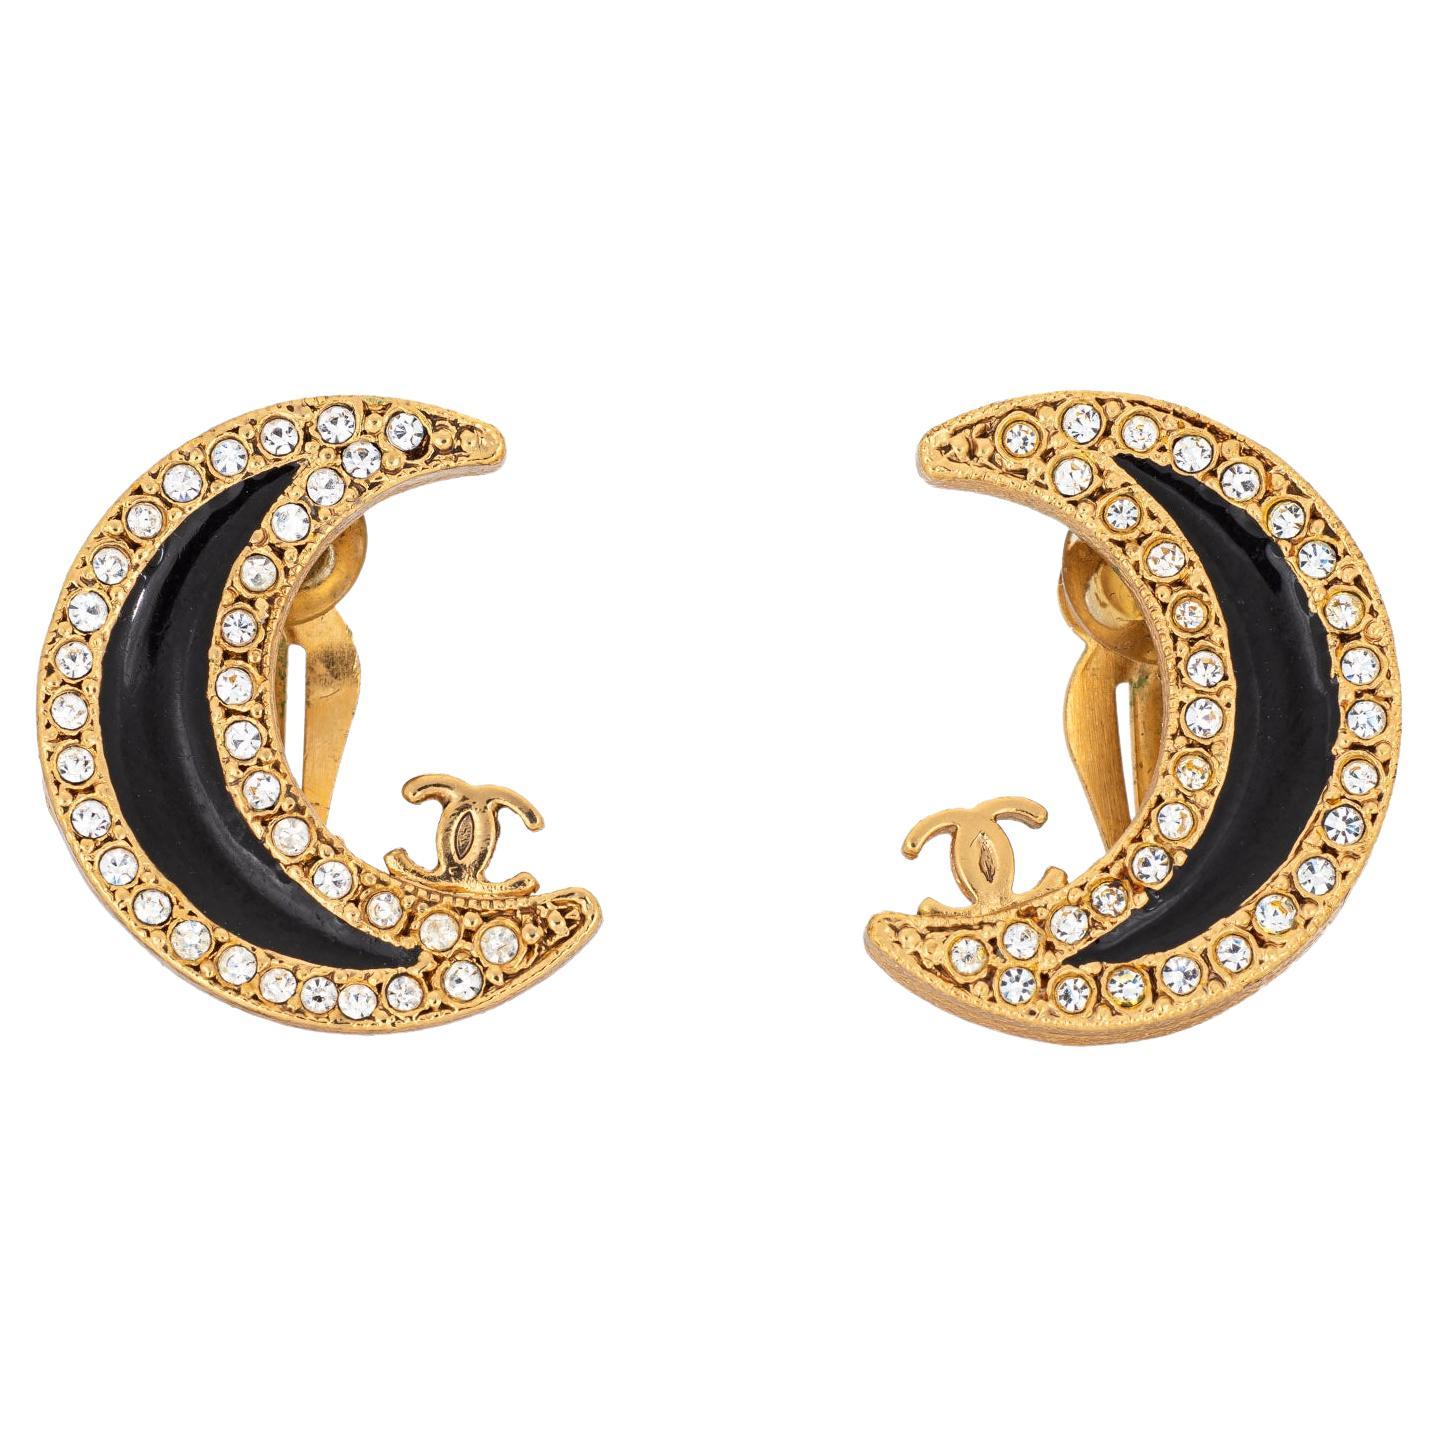 2001 Vintage Chanel Crescent Moon Earrings Crystal Clip On Yellow Gold Tone